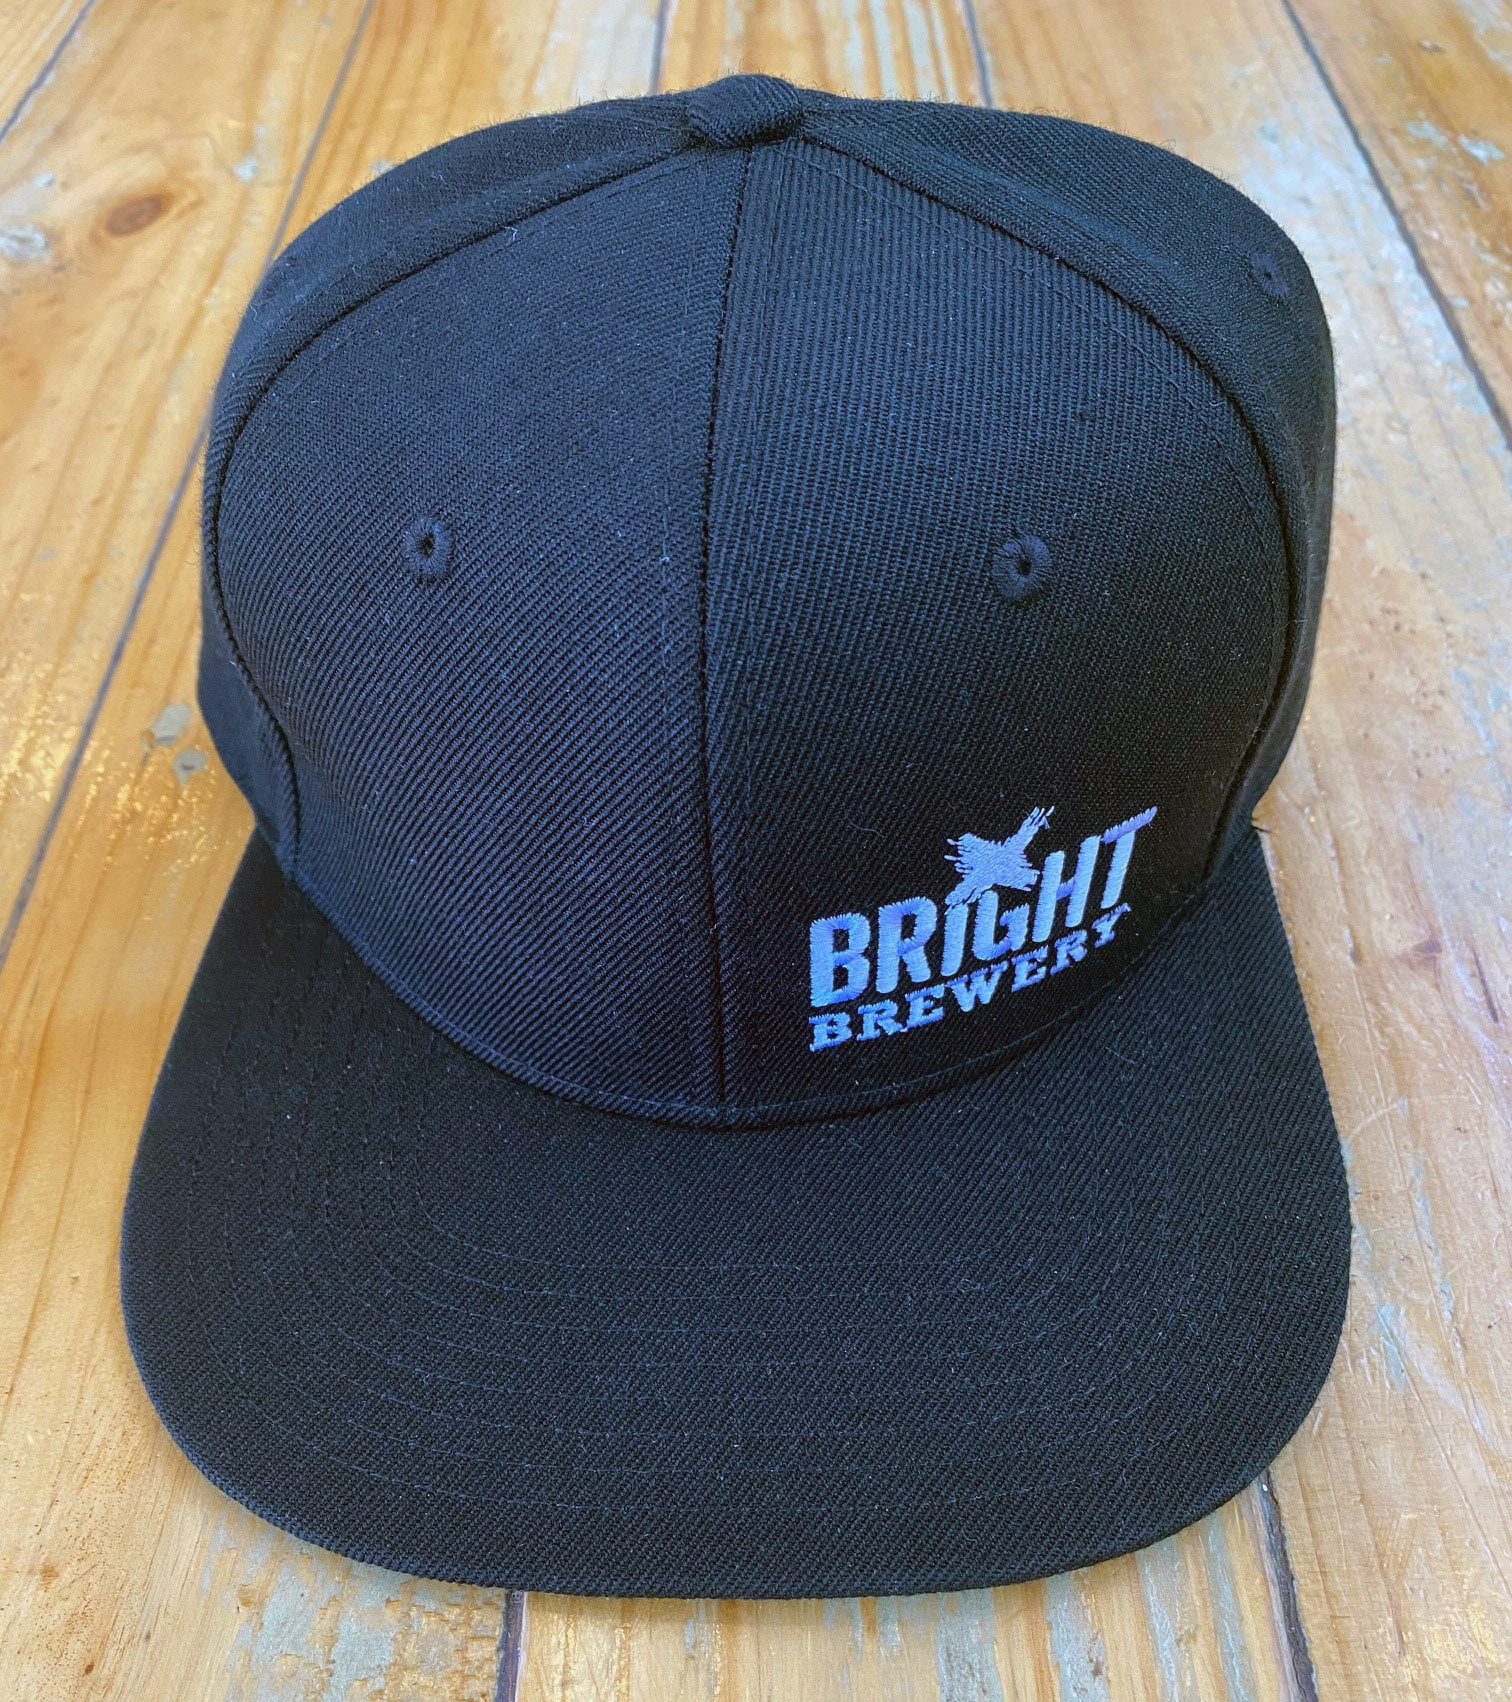 'Bright Brewery' Trim Snapback Cap - Bright Brewery | MountainCrafted ...